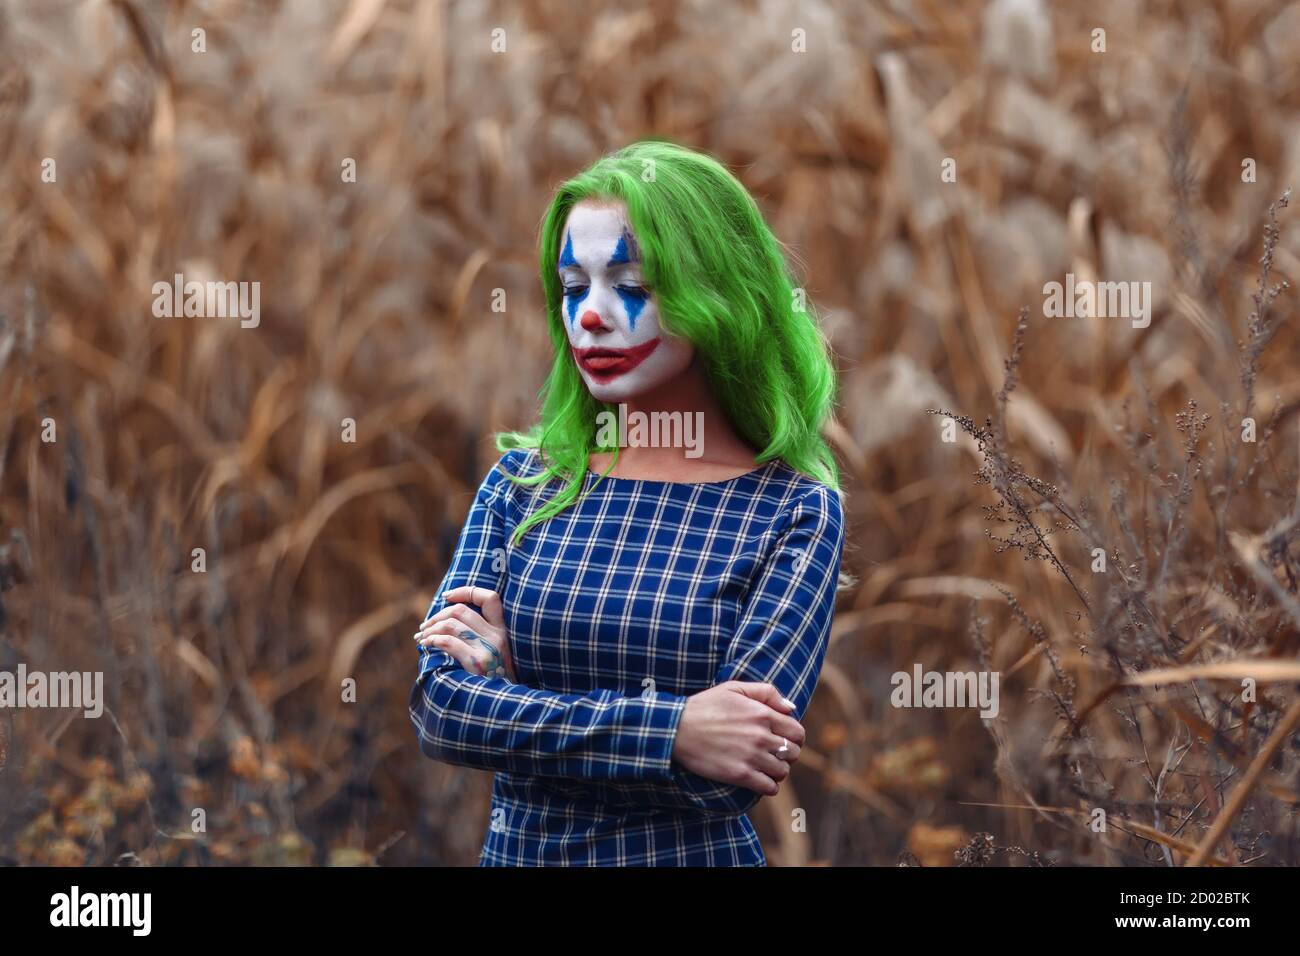 Portrait of a greenhaired girl with joker makeup on a orange leaves reeds background. Stock Photo